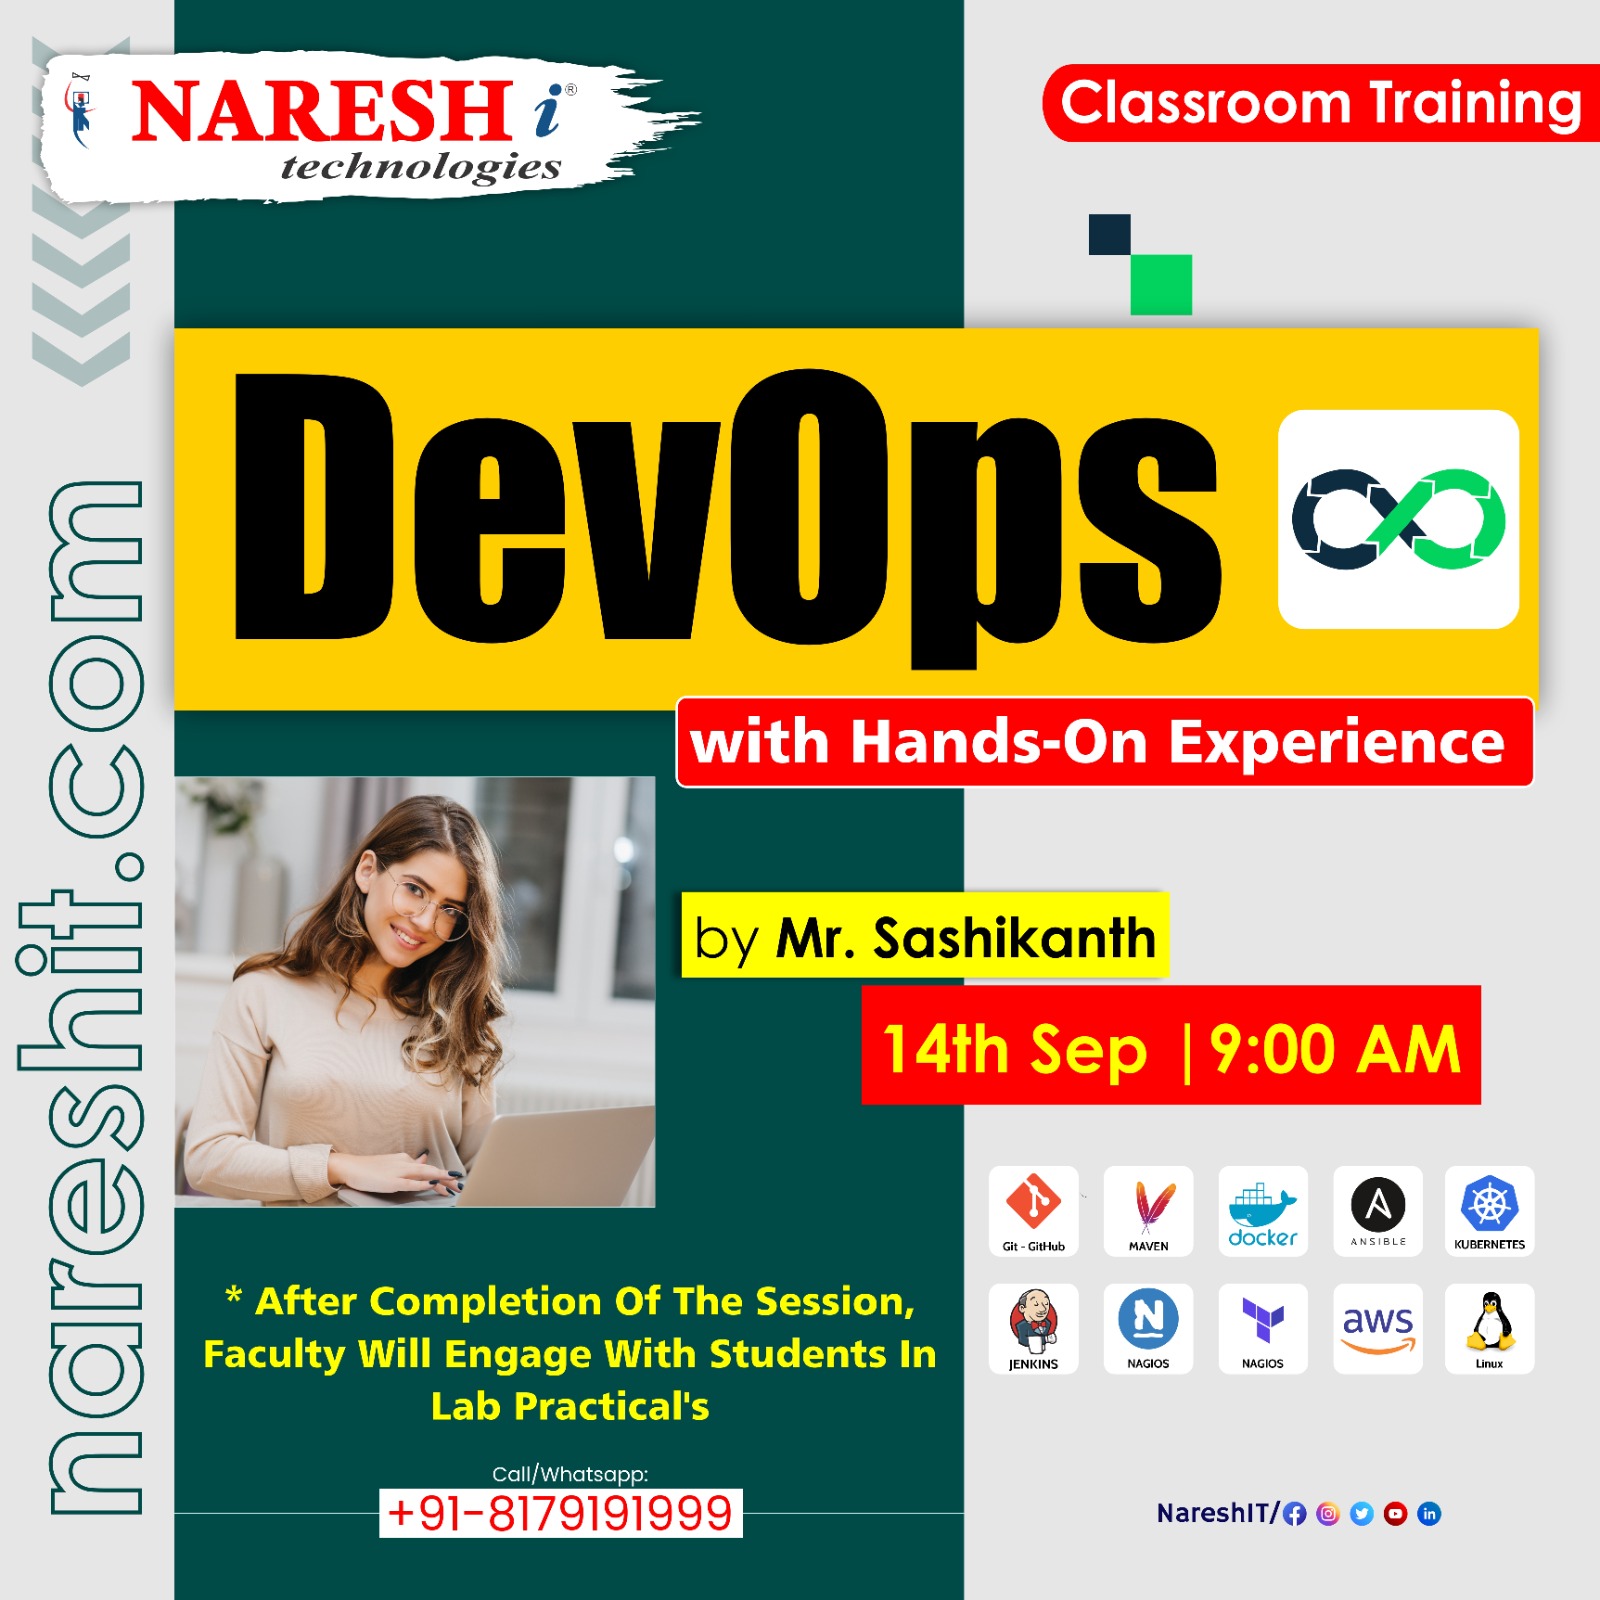 Free Demo On DevOps with Hands-On Experience - Naresh IT, Online Event